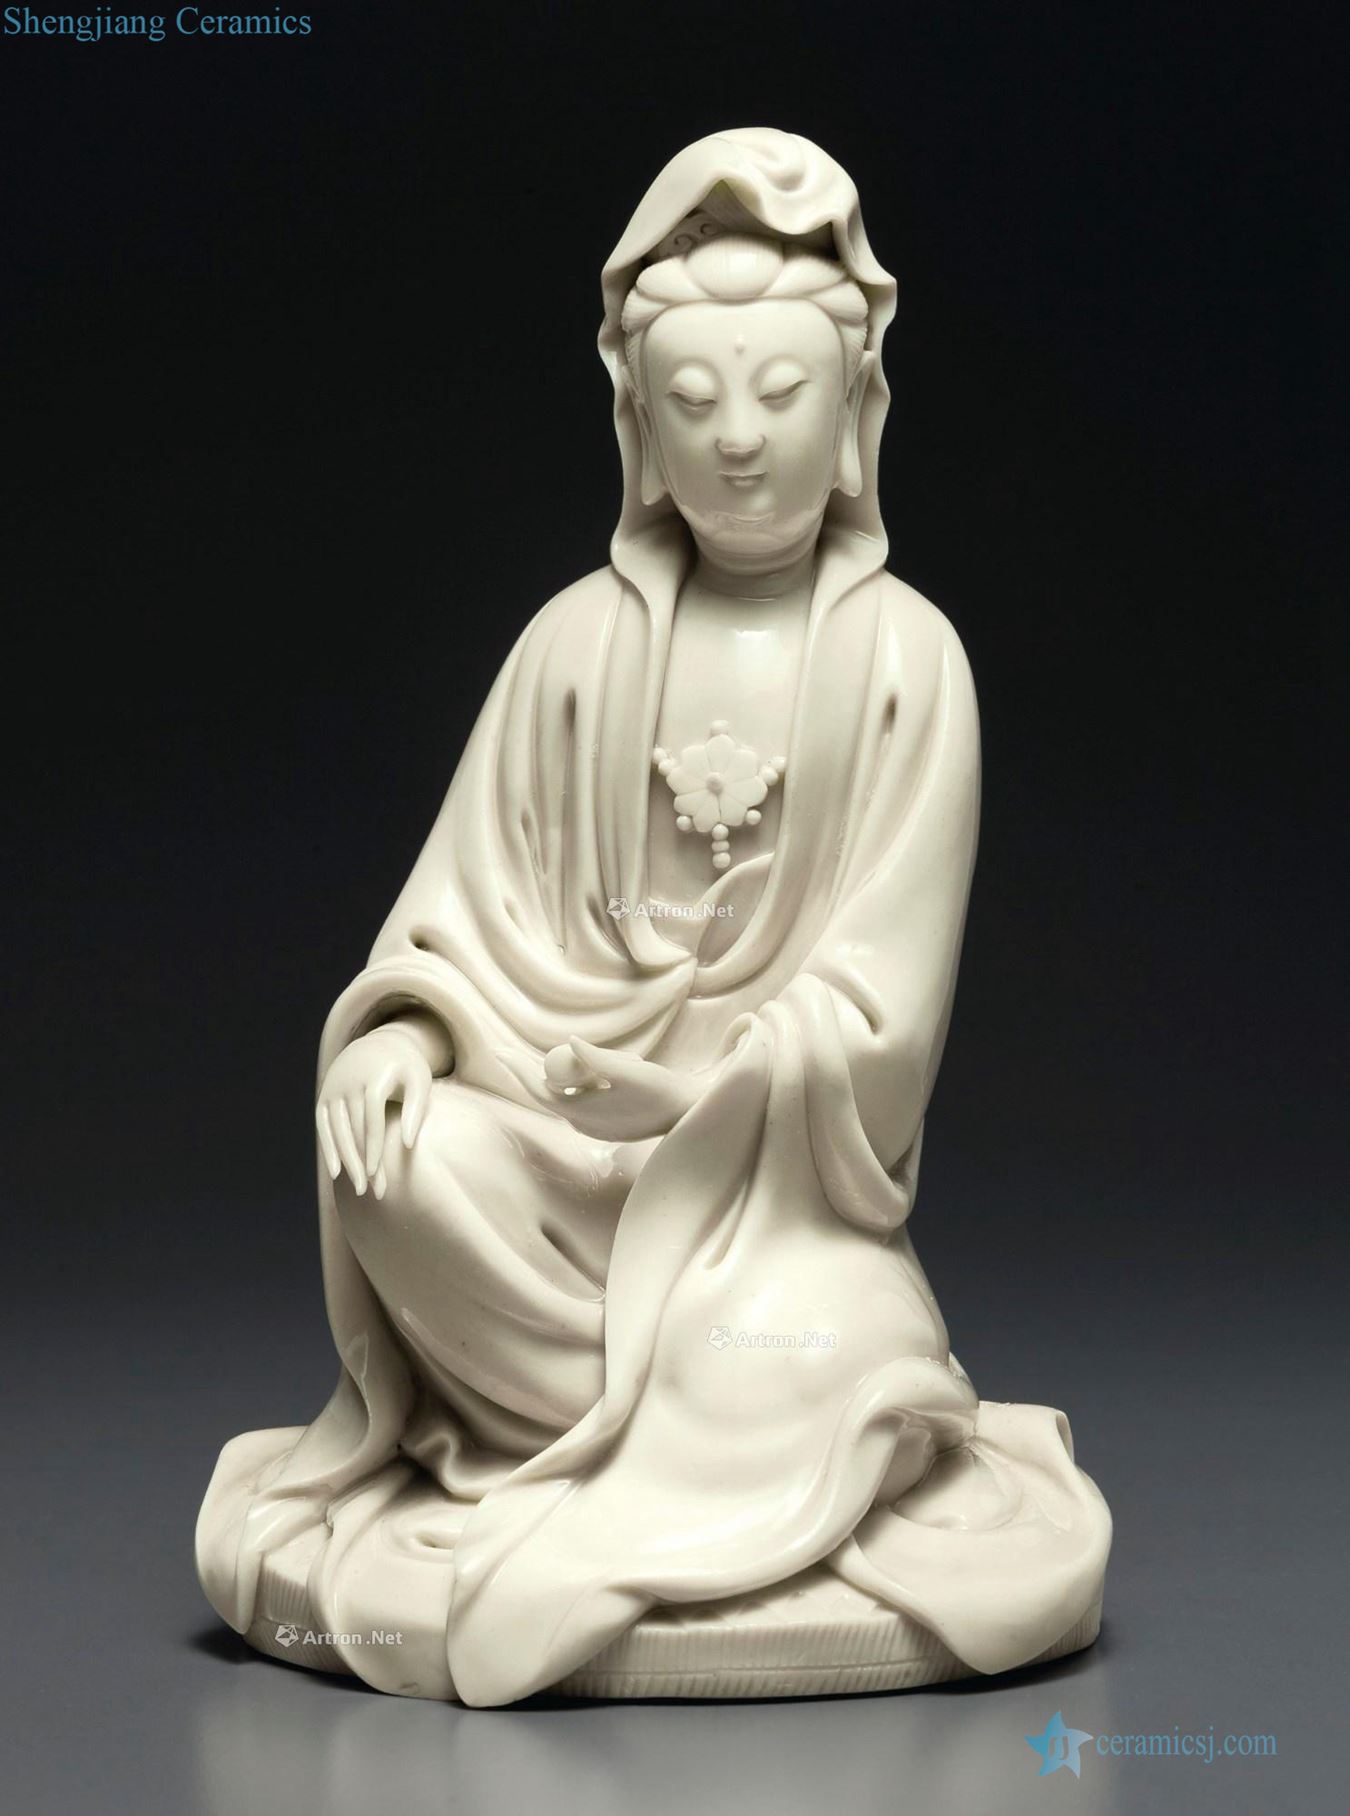 In the Ming dynasty, early 17th century A DEHUA FIGURE OF GUANYIN WITH A SCROLL